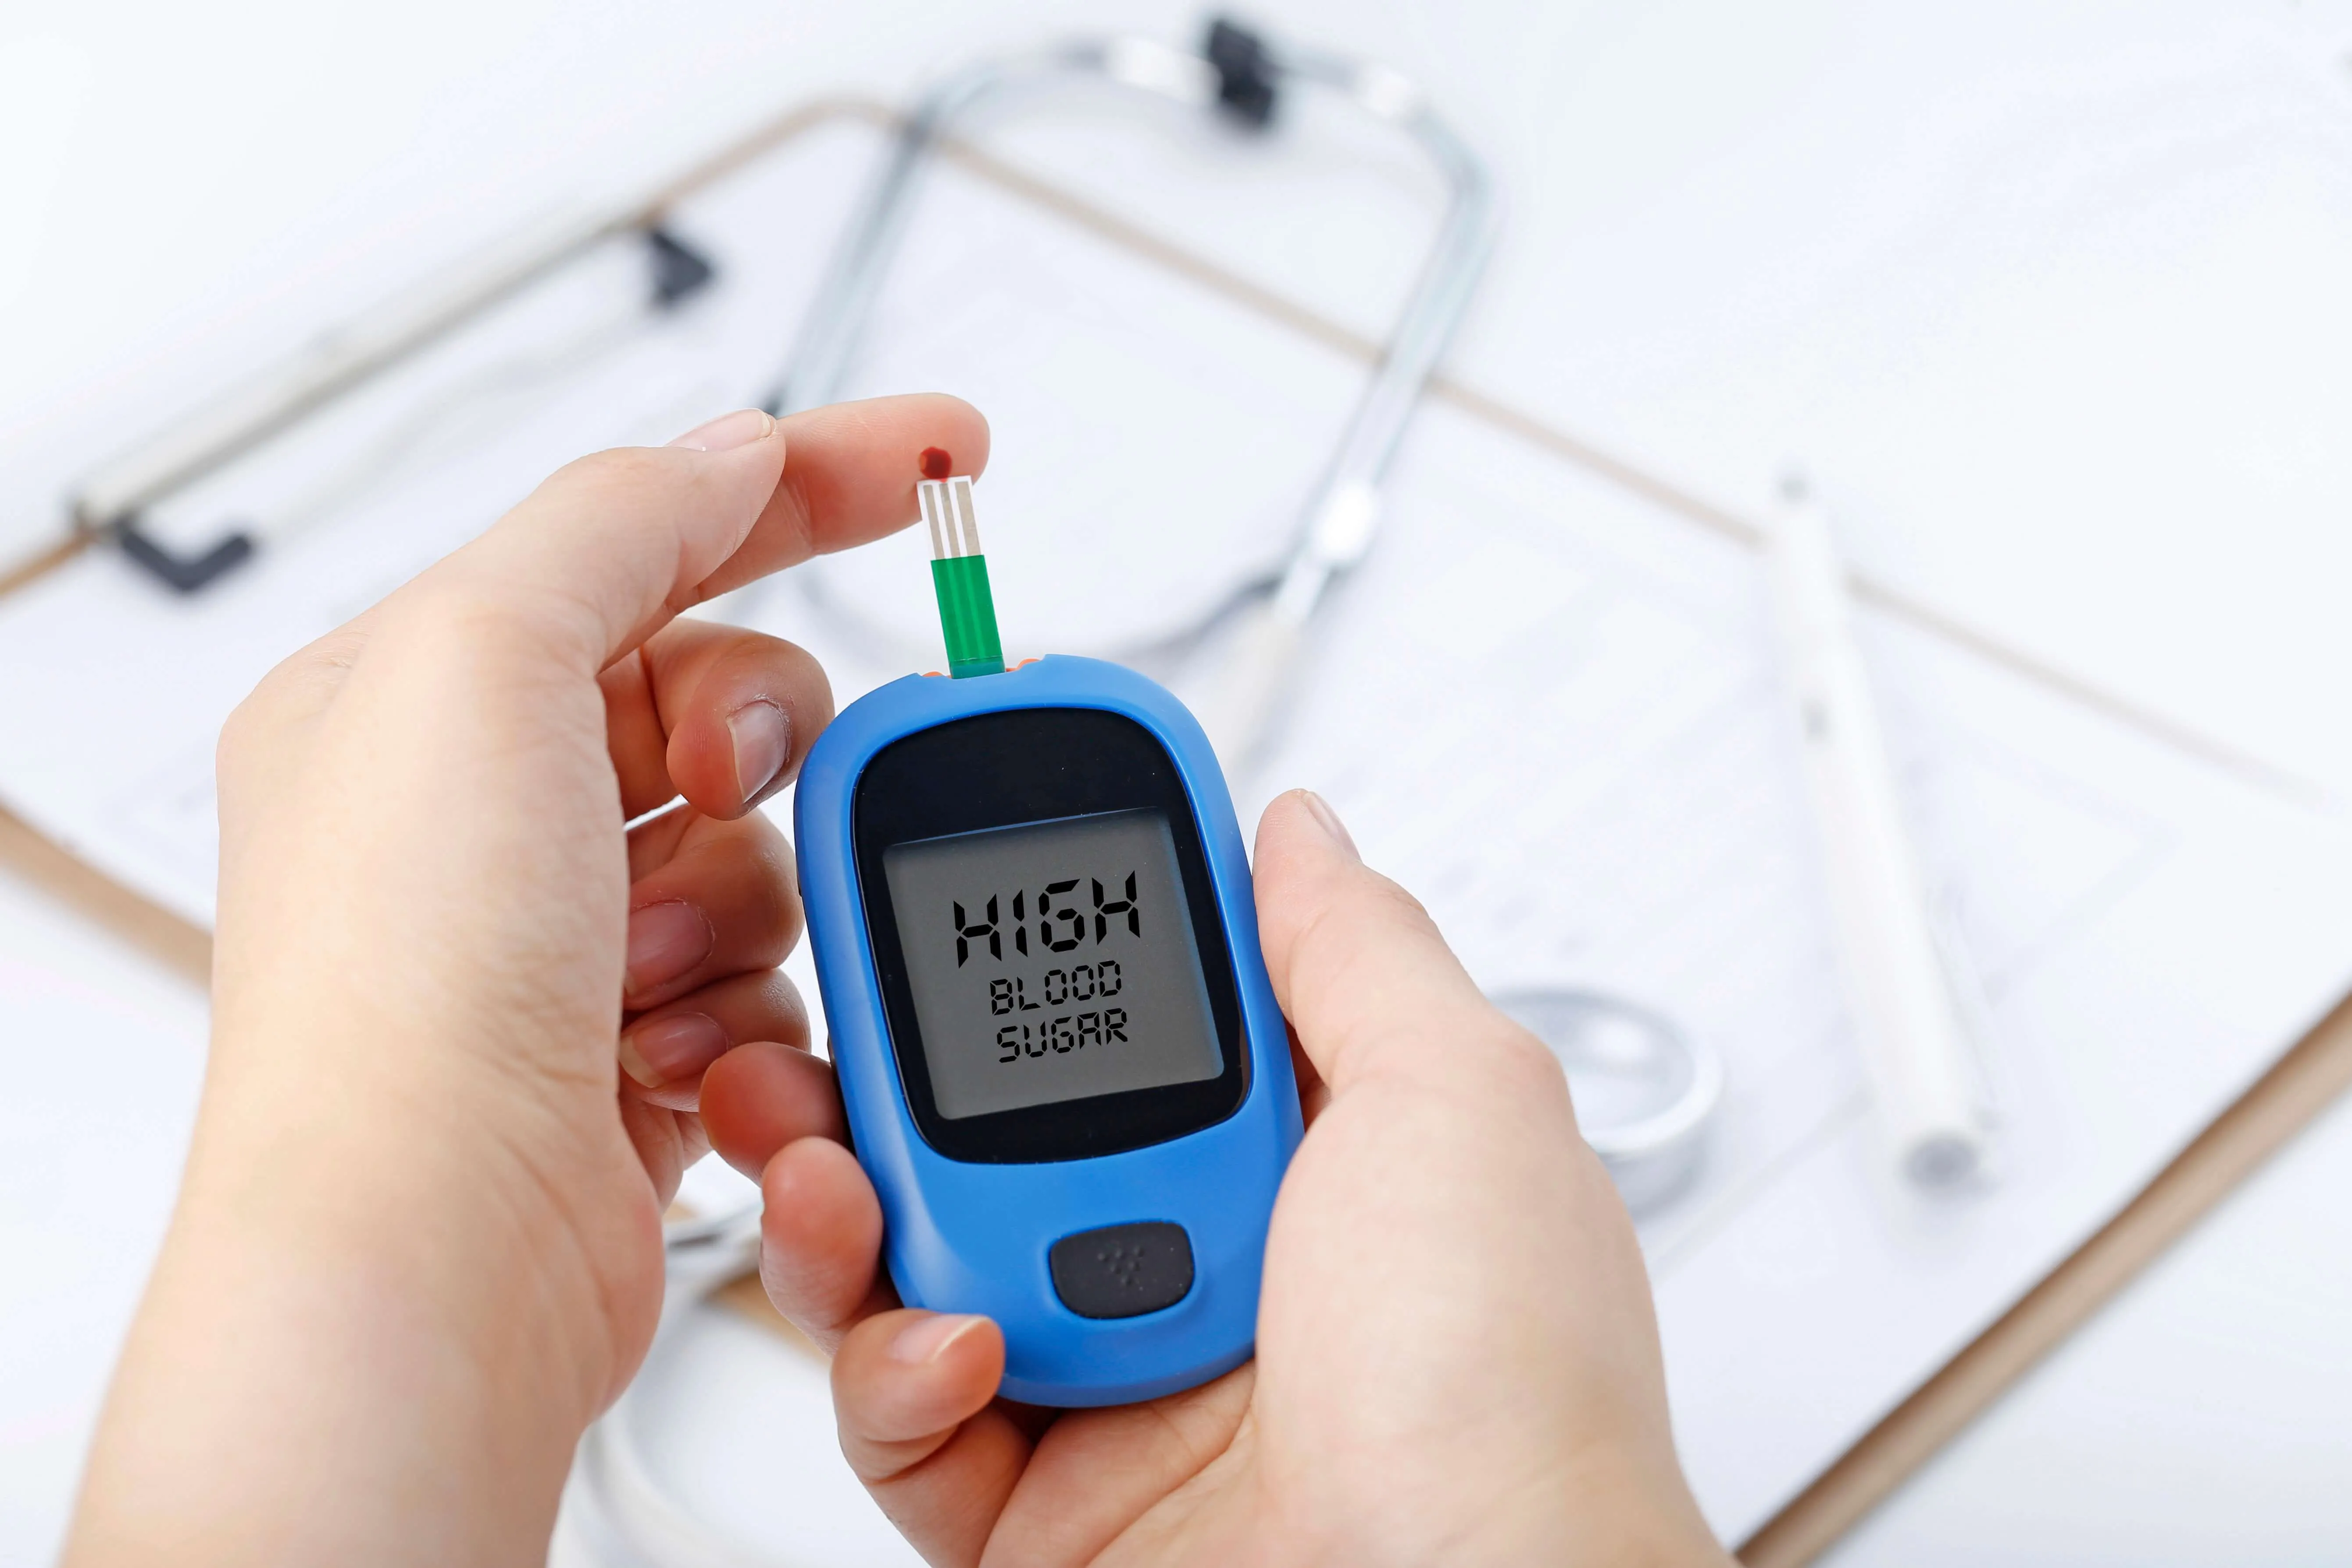 How To Know If You Have High Blood Sugar?